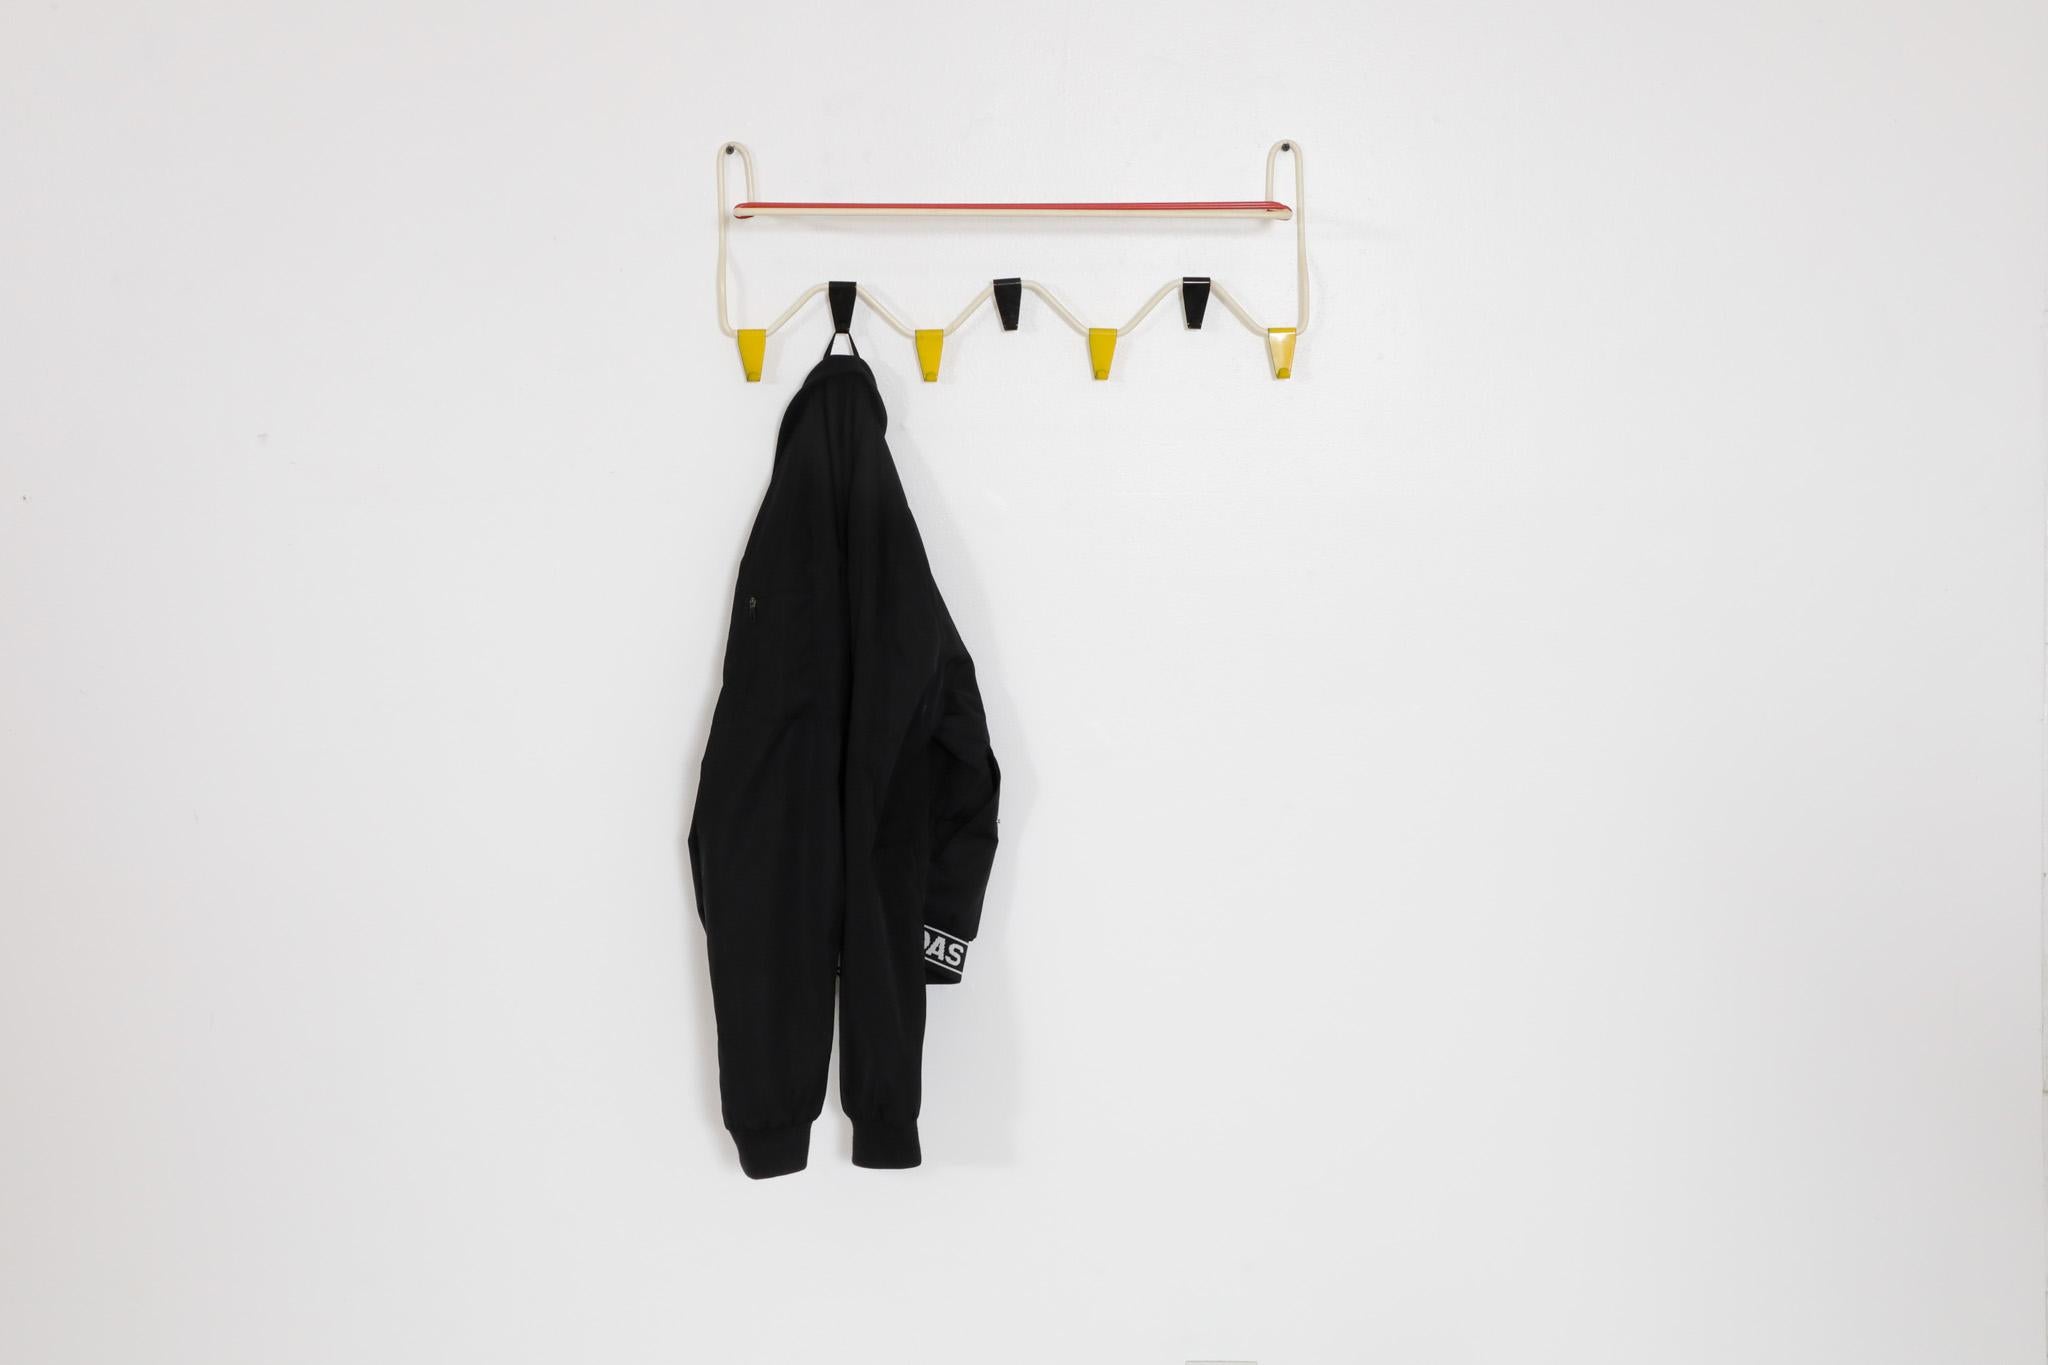 Cute wire coat rack by Coen de Vries for Pilastro. Pilastro was an Amsterdam company that proudly bore the Good Housing Quality Mark, an award given out by the publication of the 